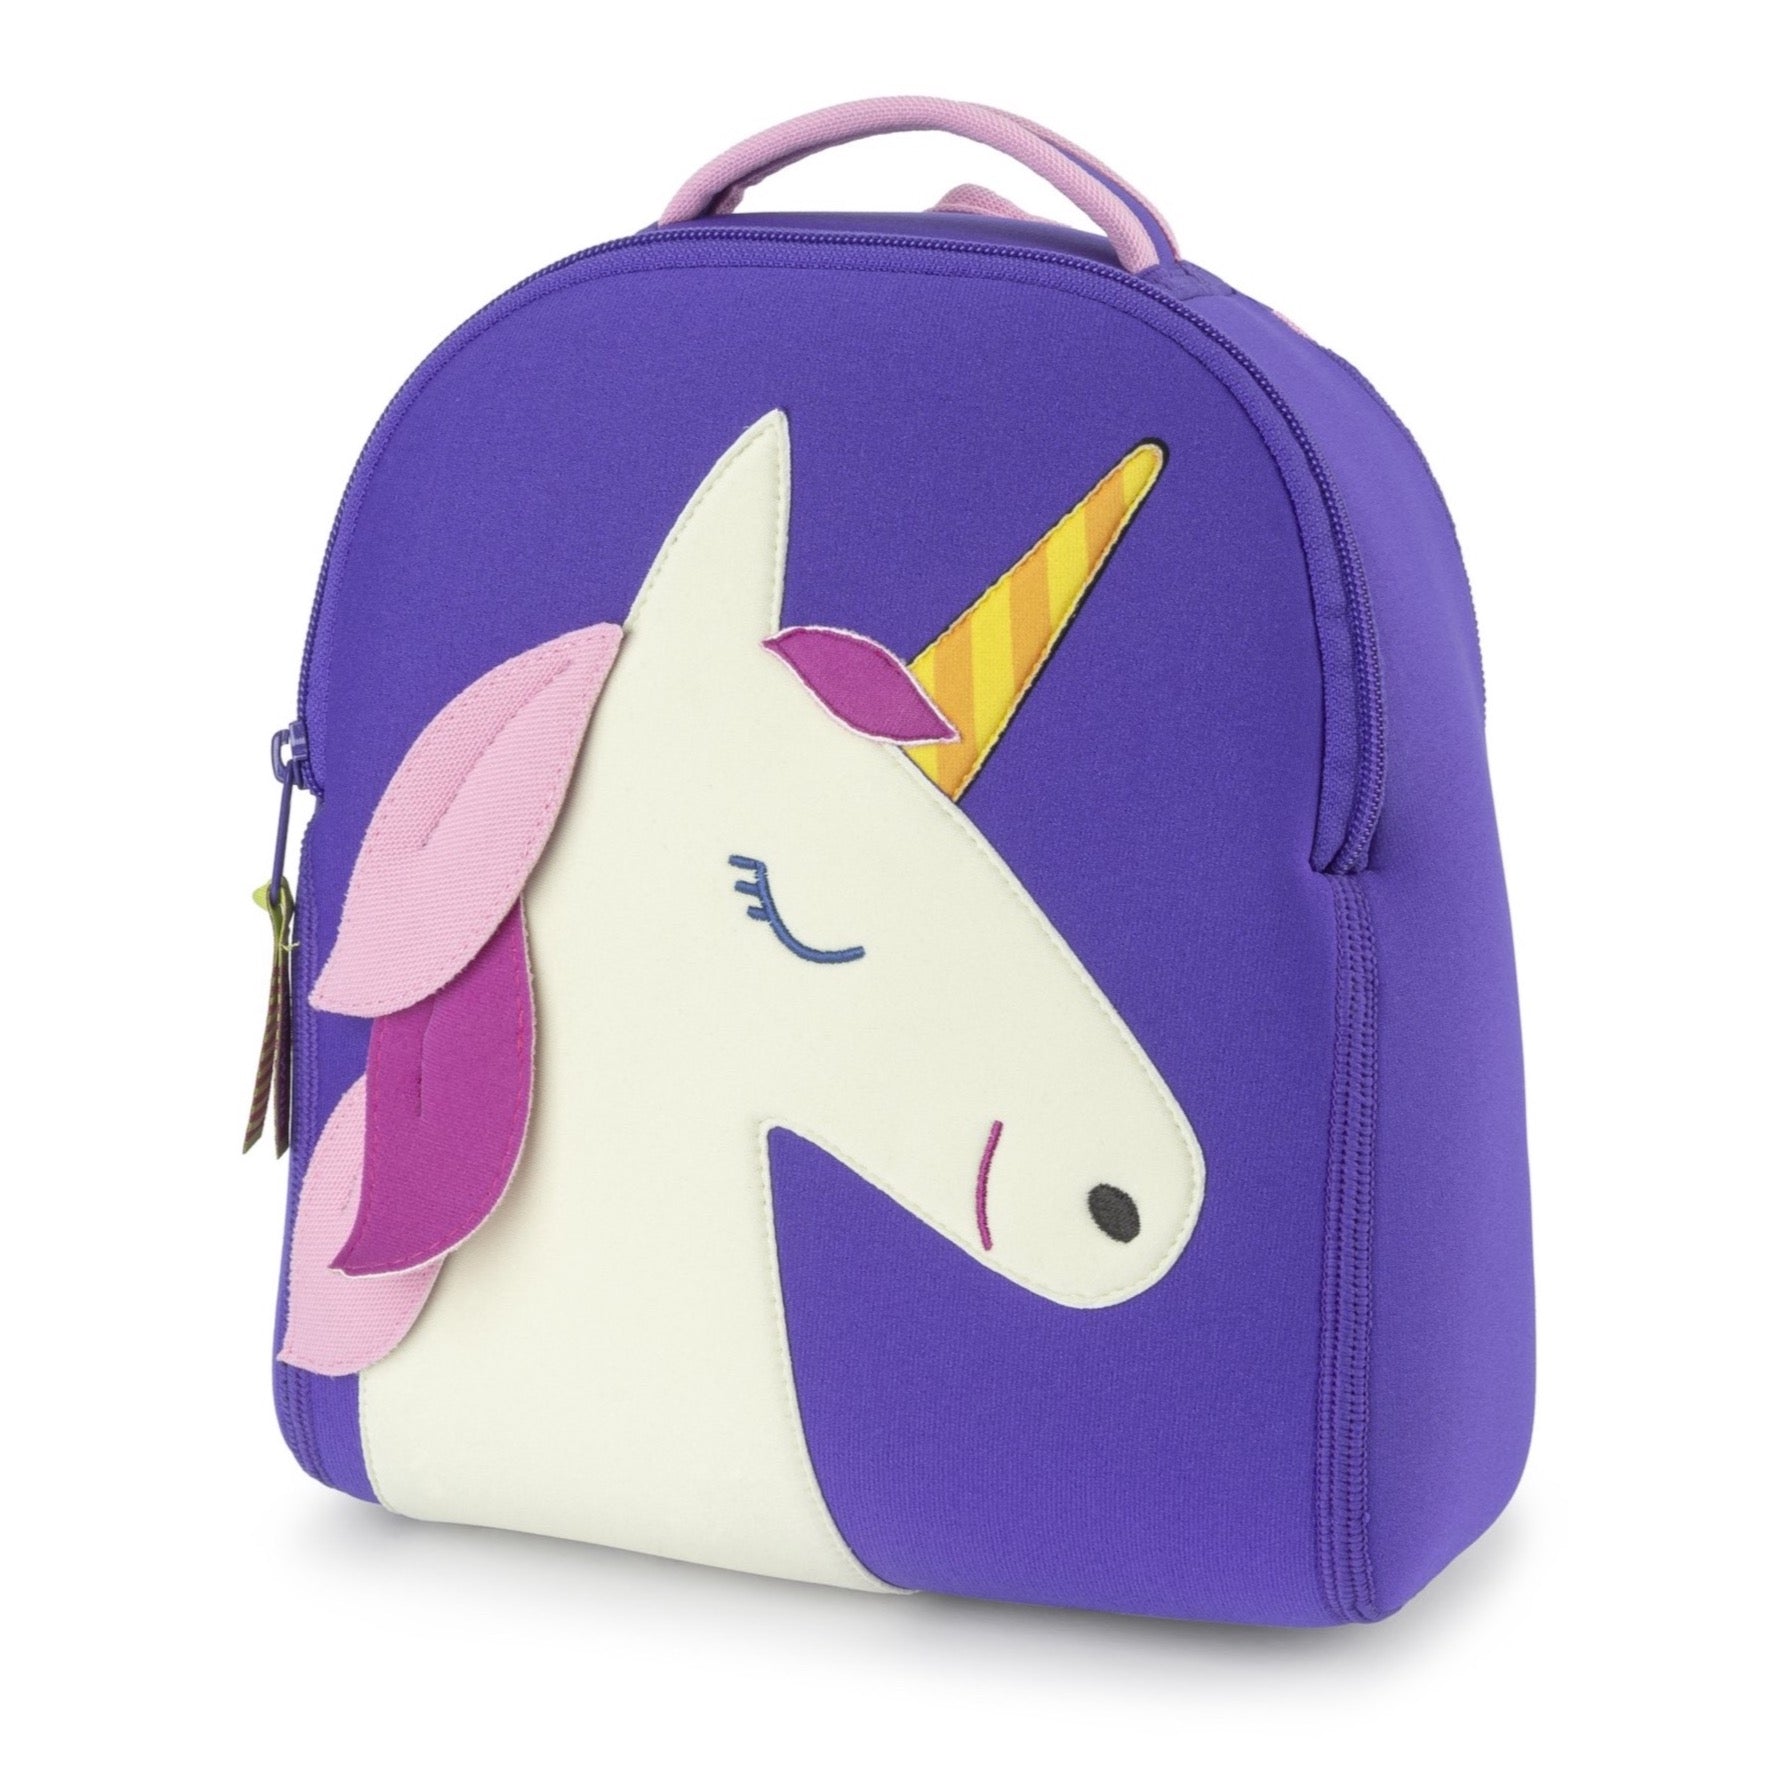 Personalized Unicorn Lunch Box Gift for Kids, Lunch Bag Magical